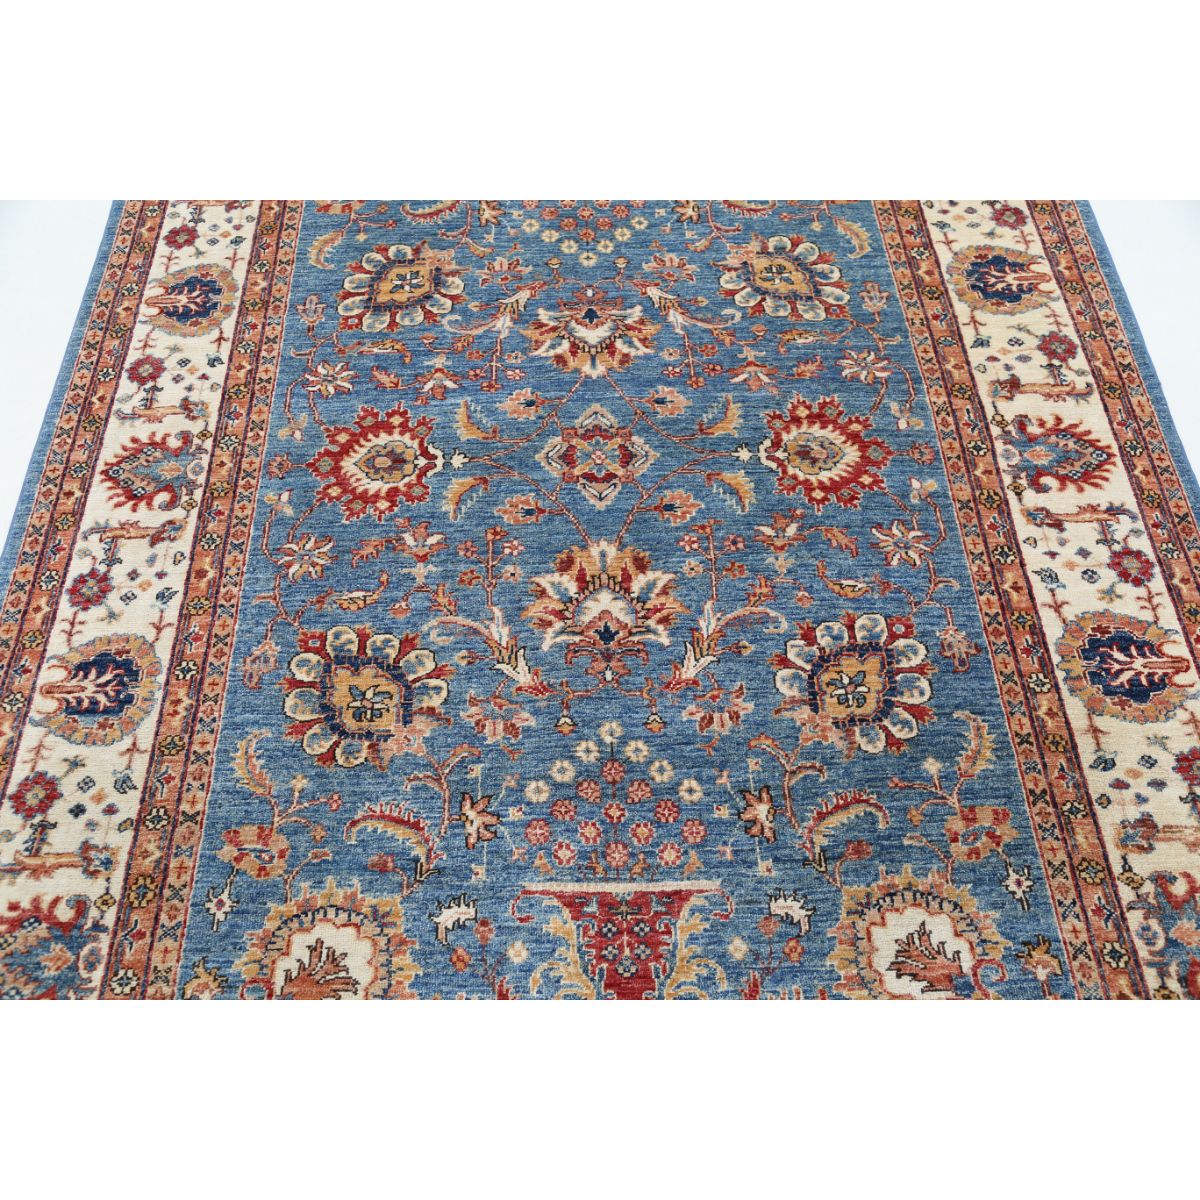 Ziegler 5'9" X 8'0" Wool Hand-Knotted Rug